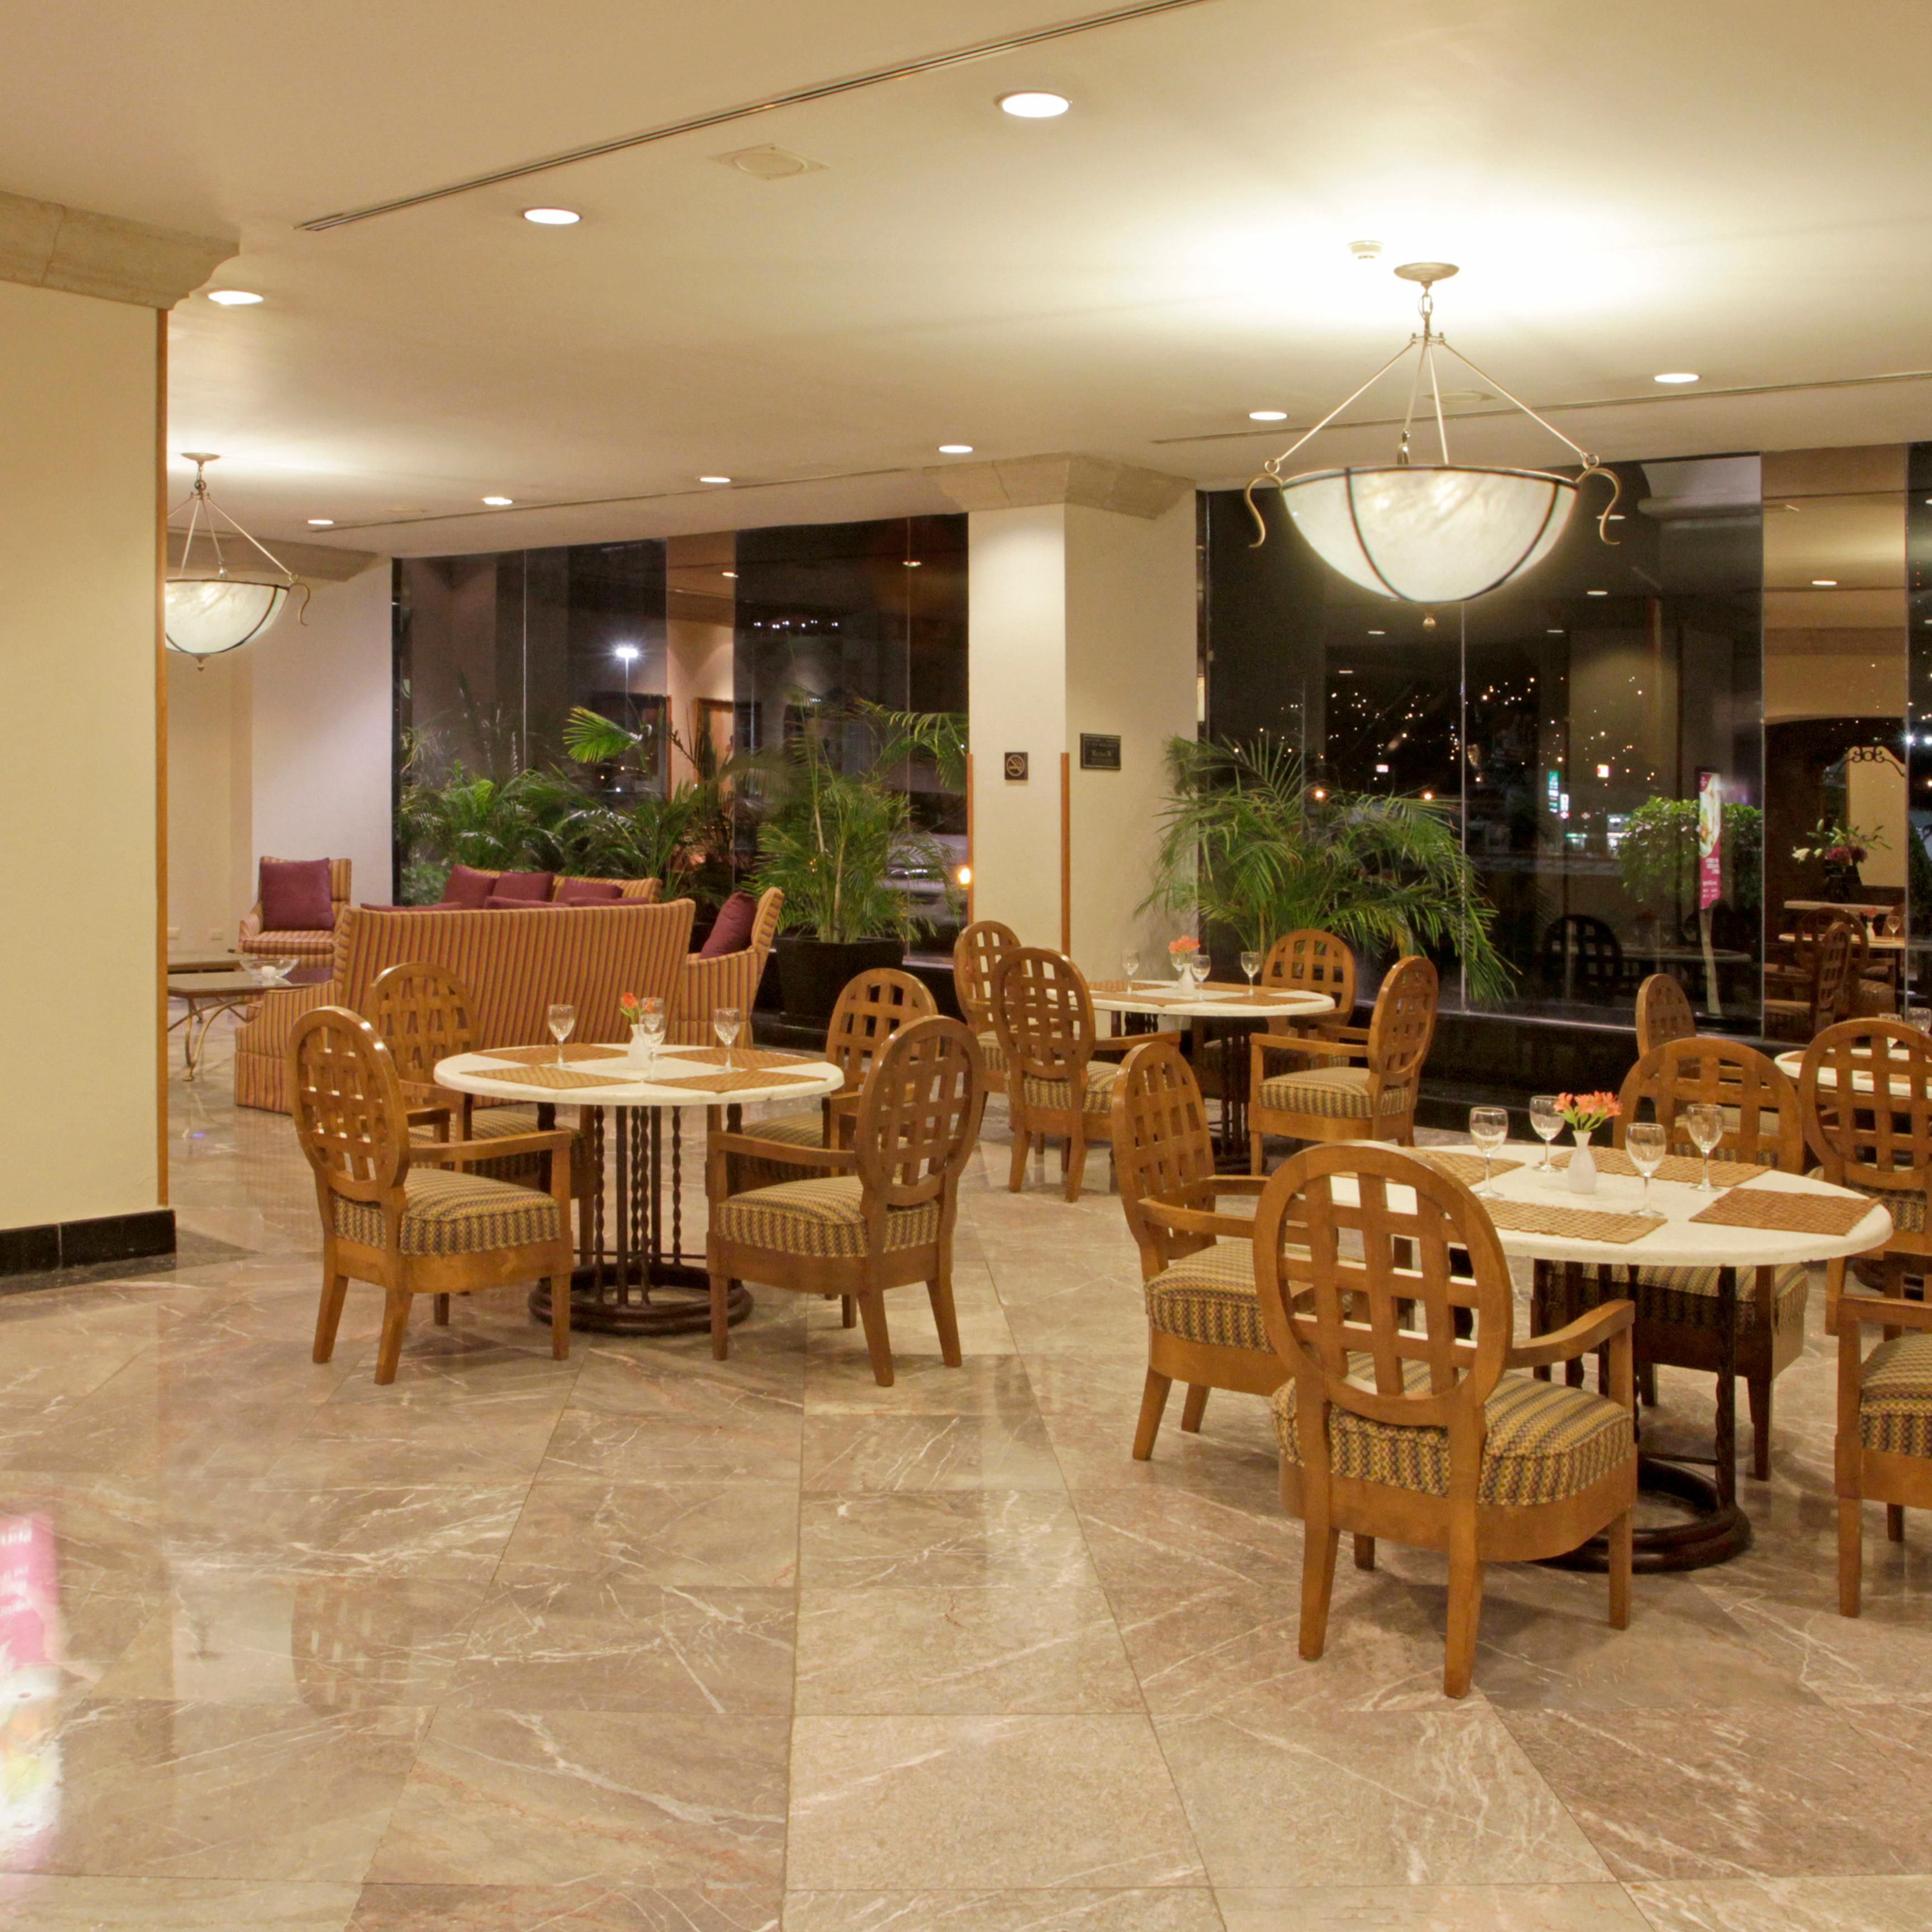 Welcome to the Crowne Plaza Monterrey hotel lobby with free Wi-Fi.